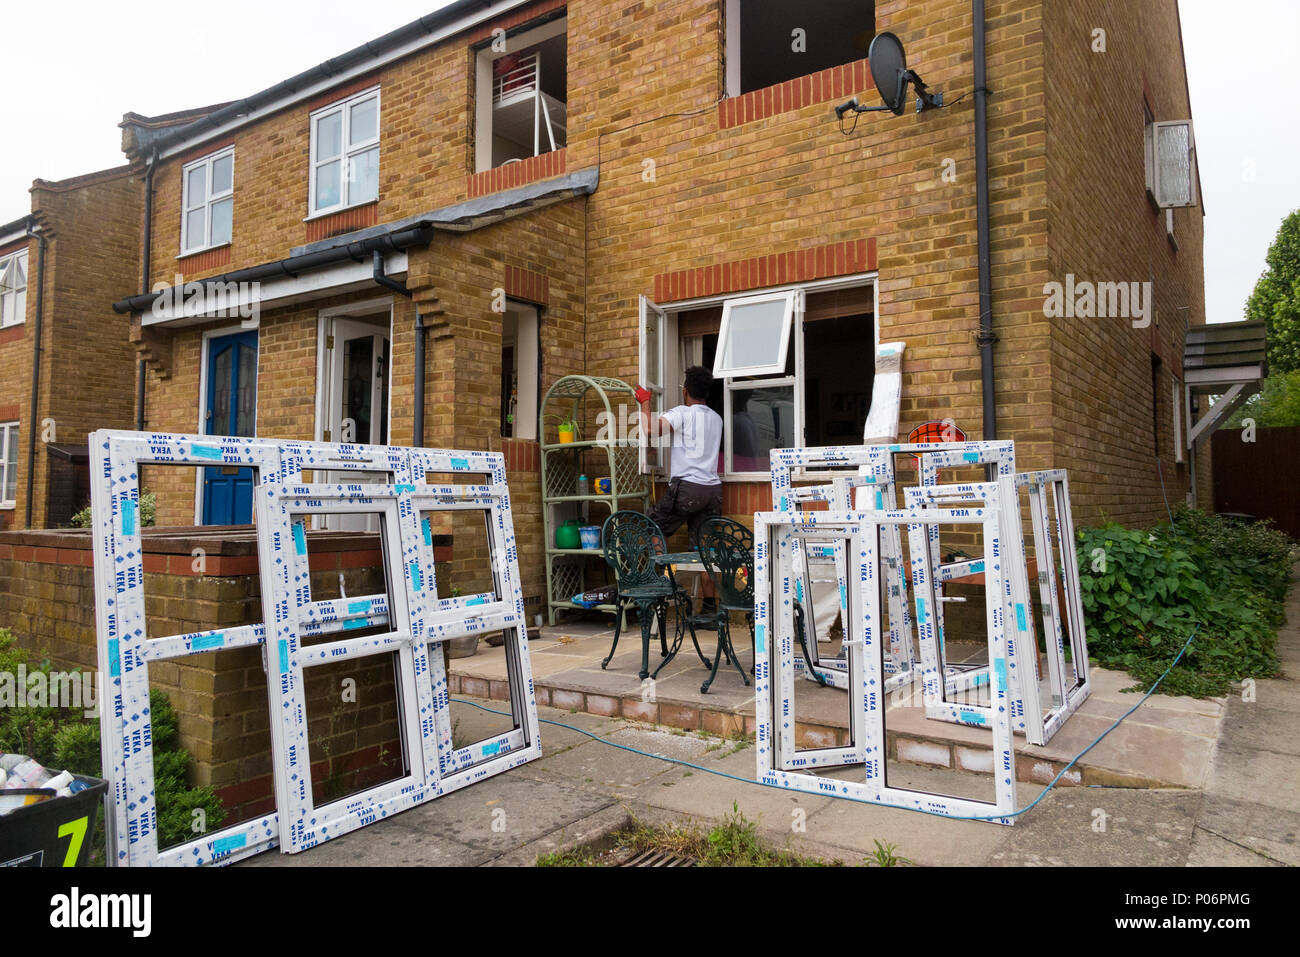 a Buy to let property / maisonette house having new replacement uPVC  / u PVC windows fitted / installed and old wooden window removed. UK (99) Stock Photo